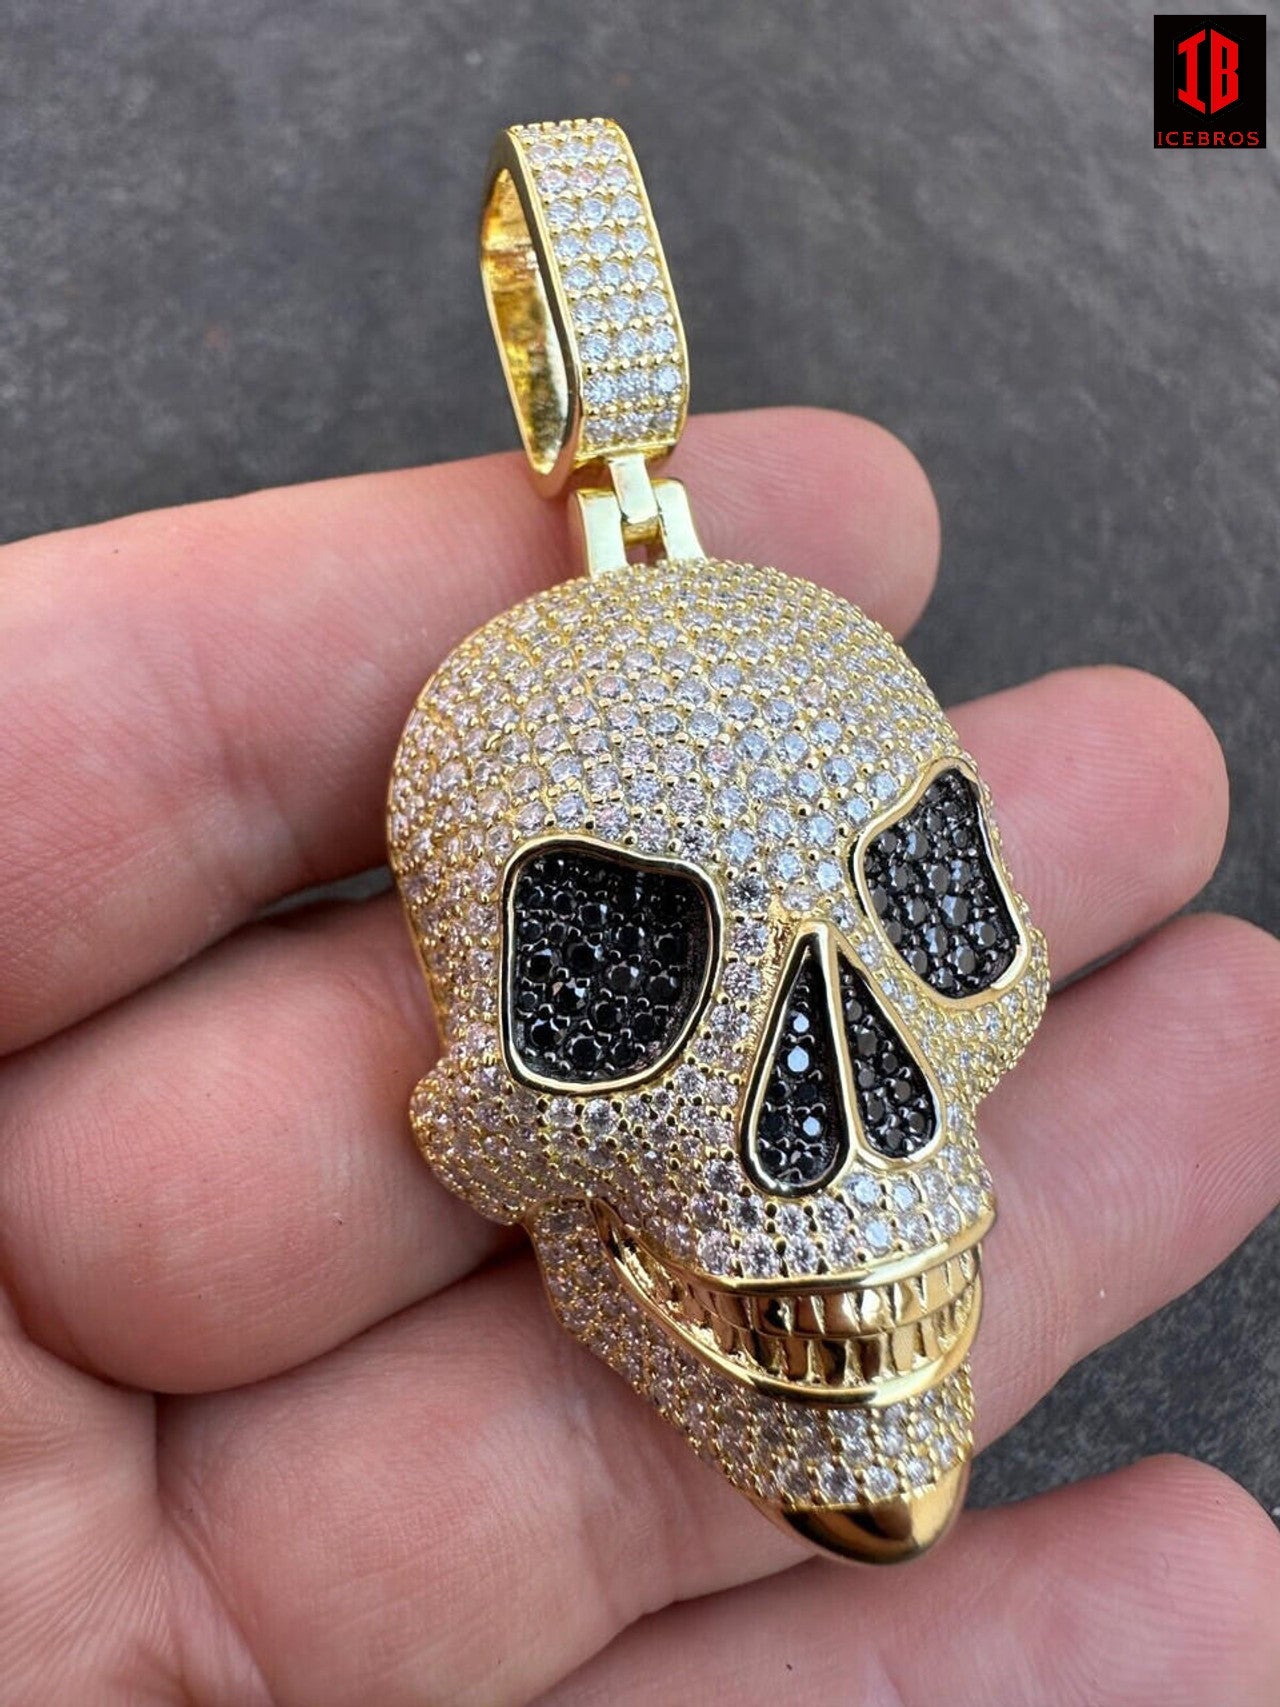 White & Black Diamond Iced out Moissanite Skull Pendant 3d 925 Sterling Silver Necklace Hip Hop Jewelry